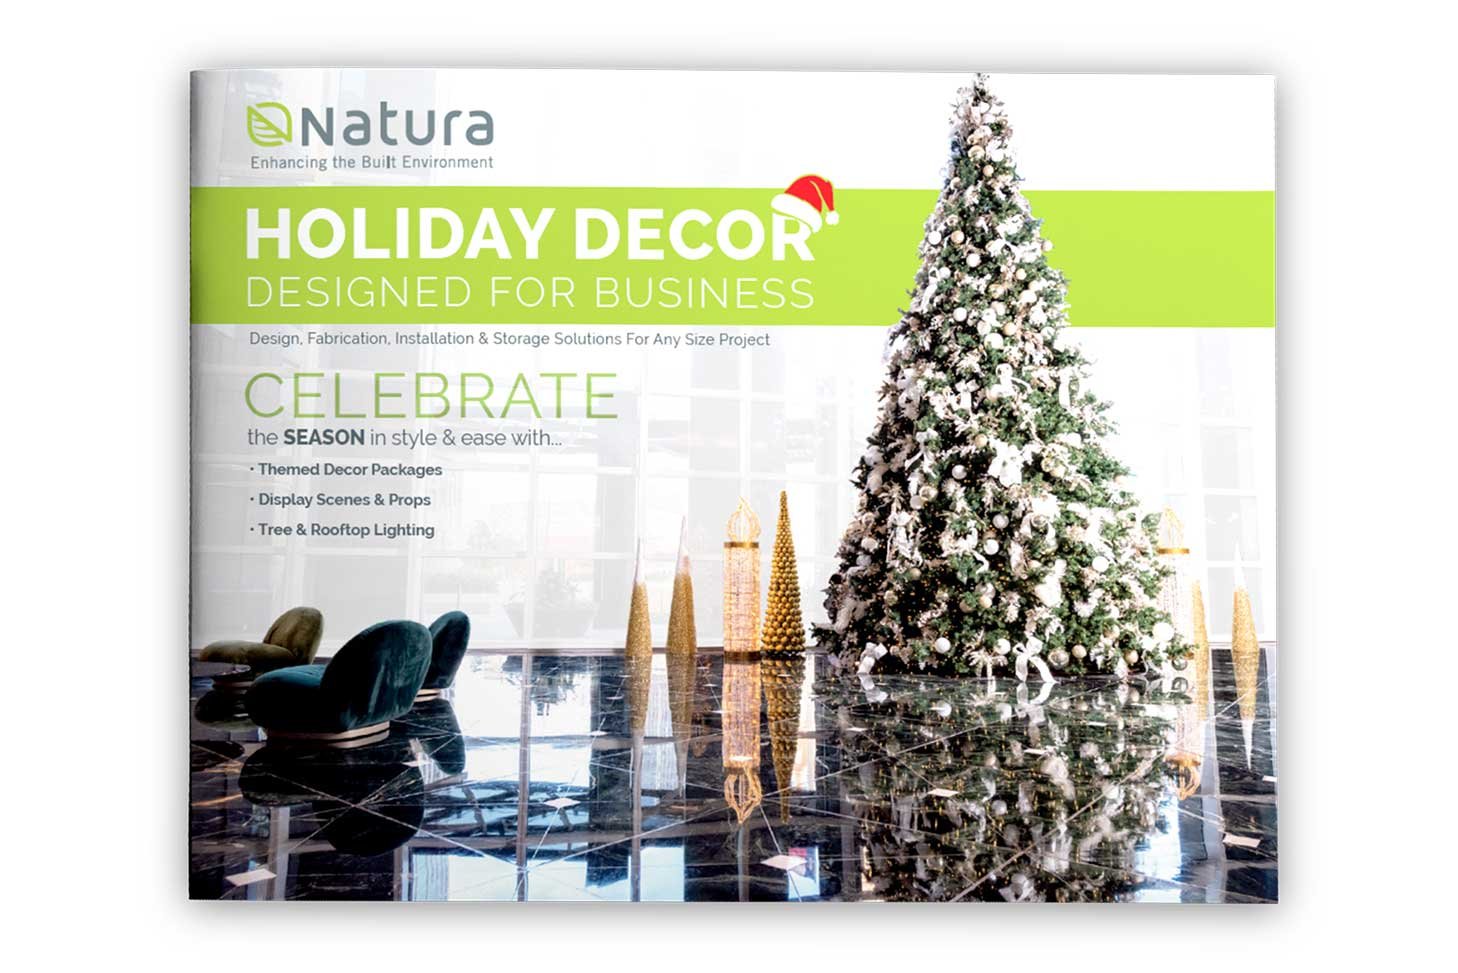 Natura-Art-of-The-Holiday-cover